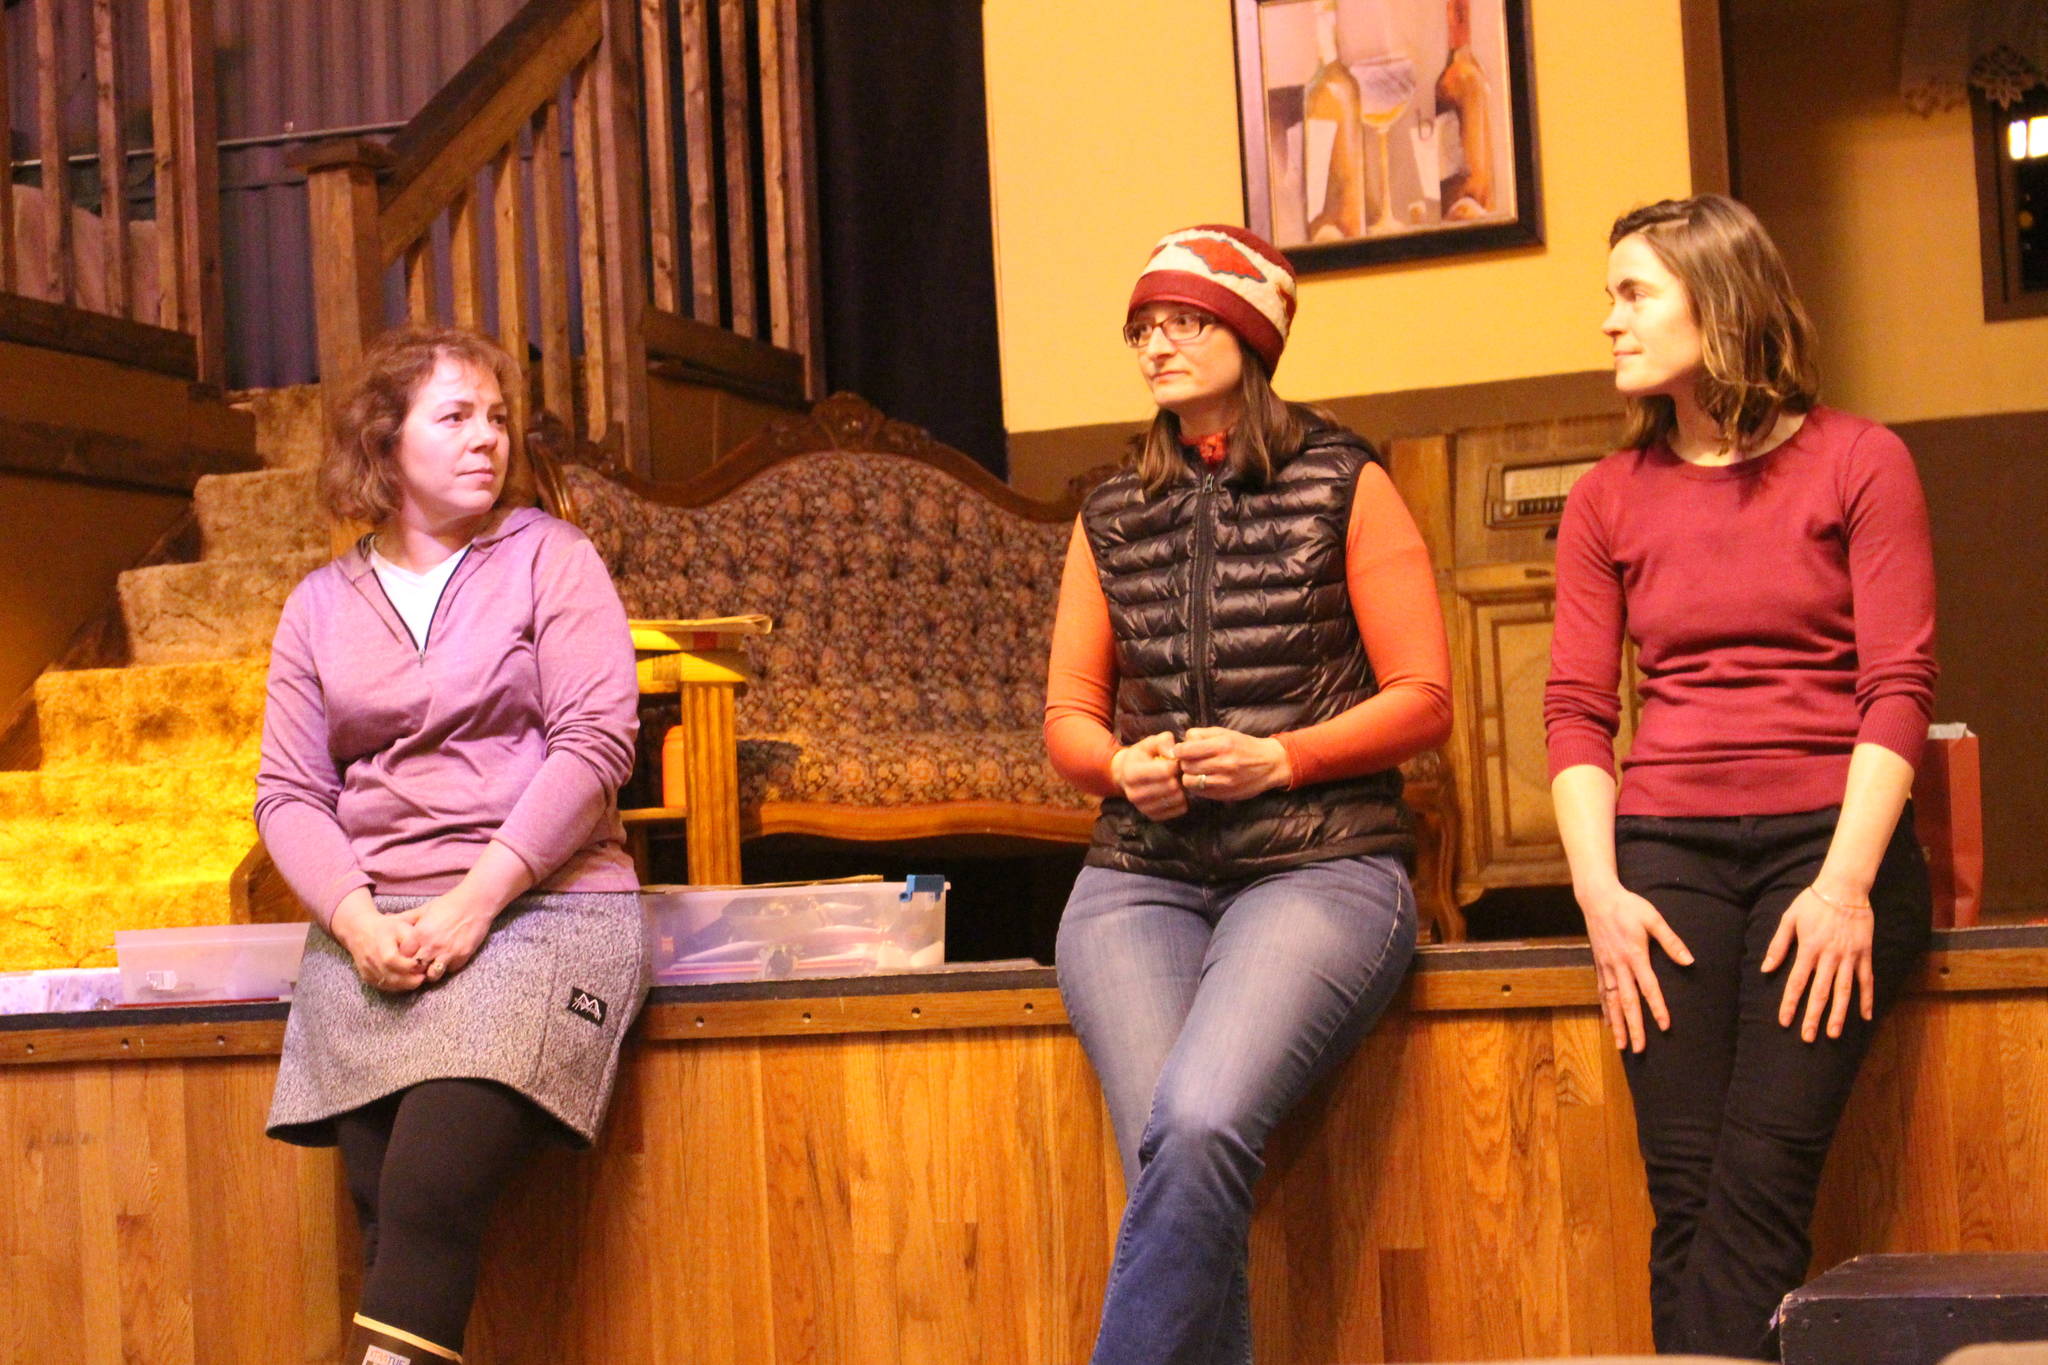 From left, Wendy Dutcher, Sarah Pyhala and Kaitlin Vadla speak to members of 100+ Women Who Care at the Triumvirate Theatre in Nikiski, Alaska on Dec. 26, 2019. (Photo by Brian Mazurek/Peninsula Clarion)